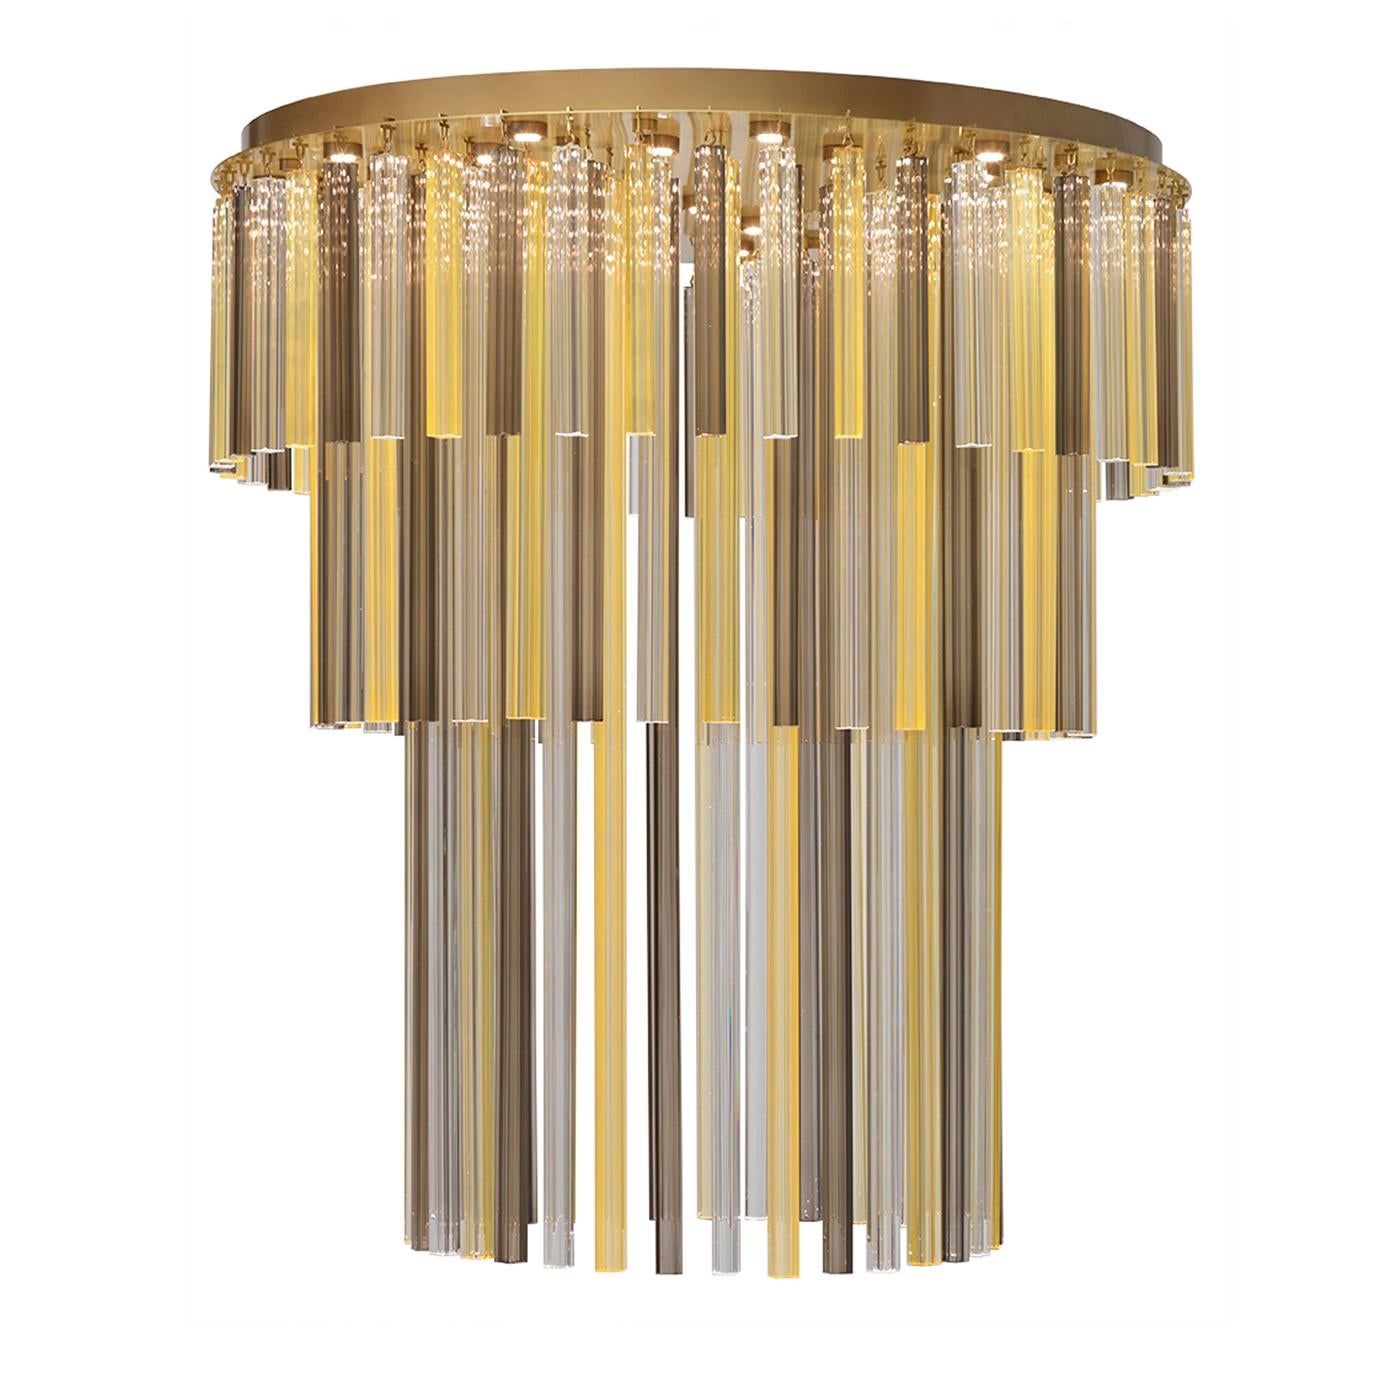 Whatever your dream is, Daytona will recount your aspirations which consider synthesis is a soul Virtue. Daytona is the luxury brand by Signorini&Coco, entirely Made in Italy. Nyc chandelier has a satin brass structure, with integrated LEDs. Elegant